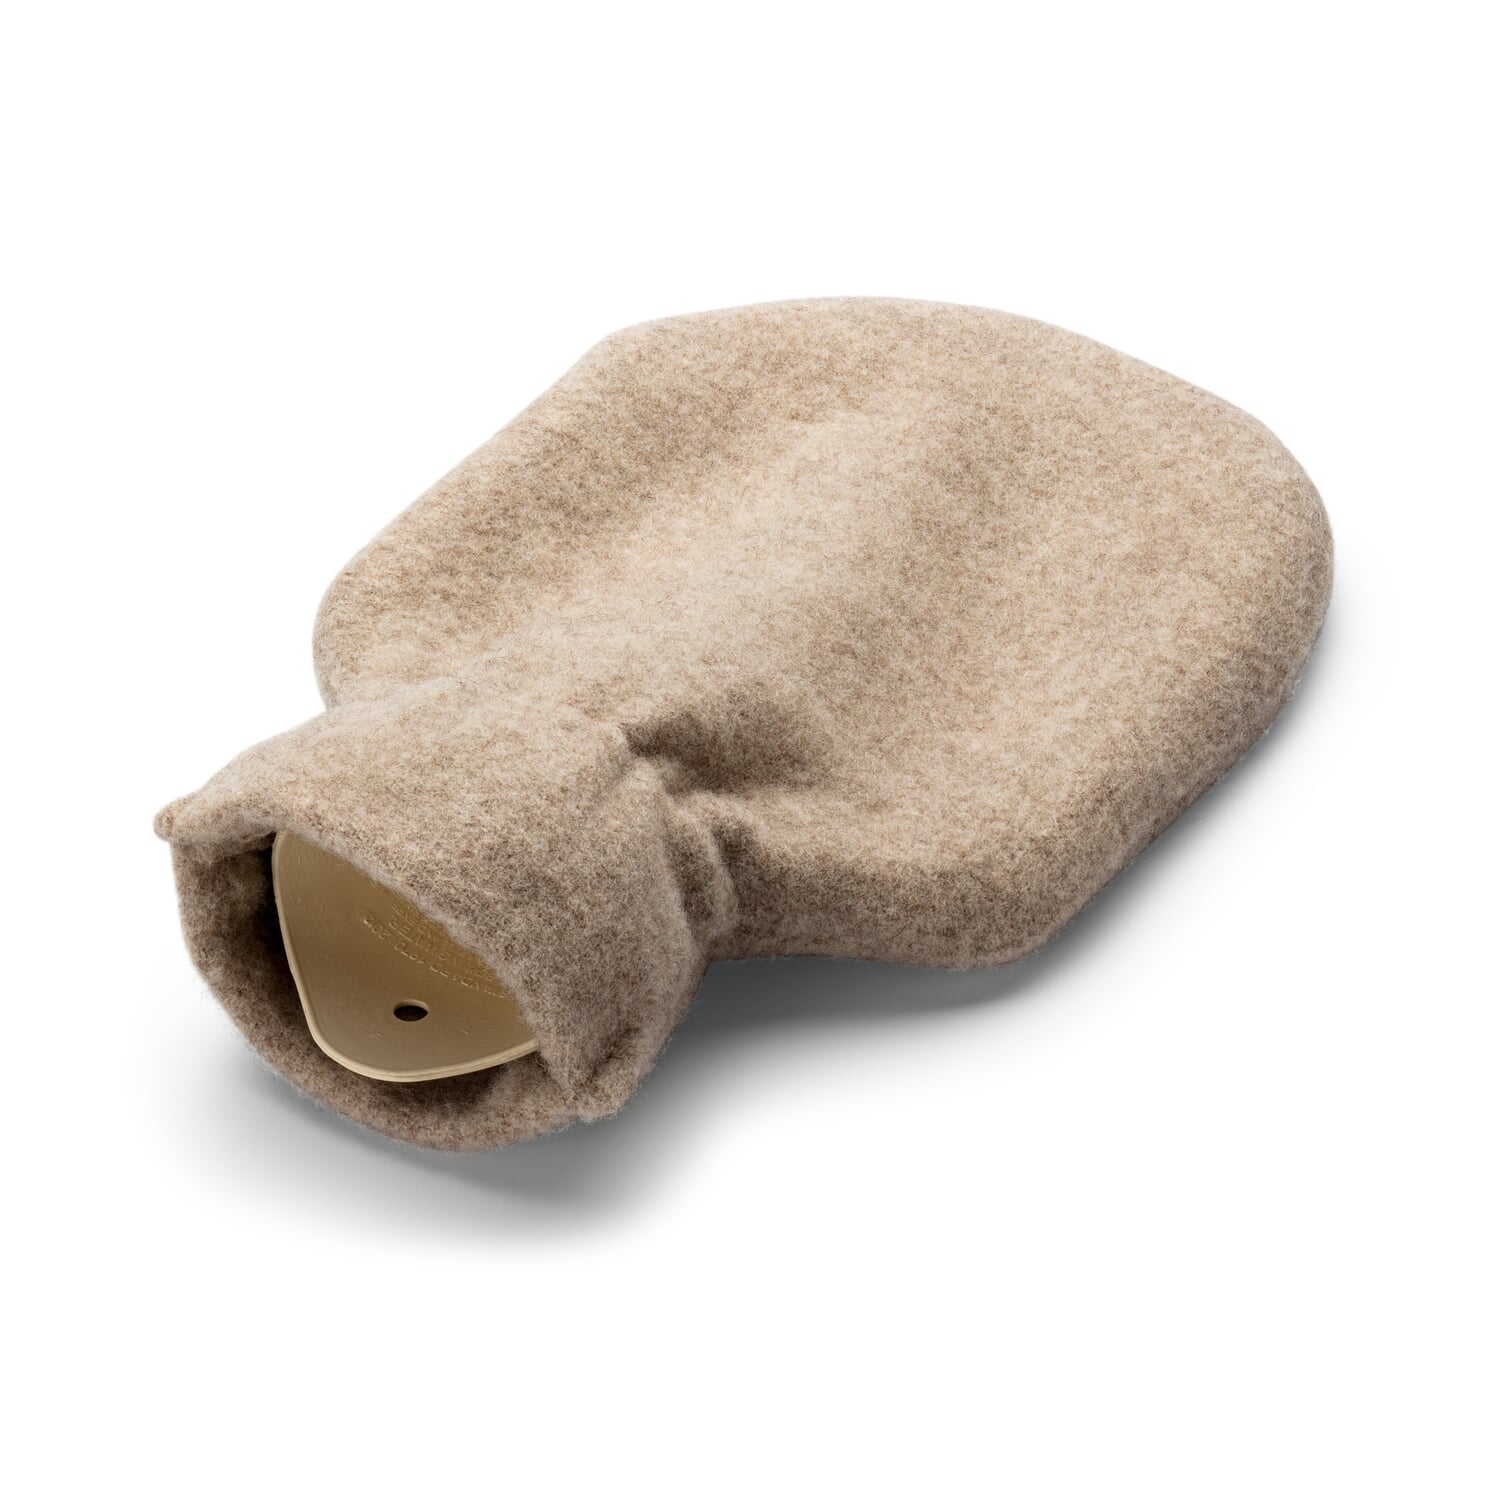 Hot water bottle with merino wool cover, Nature